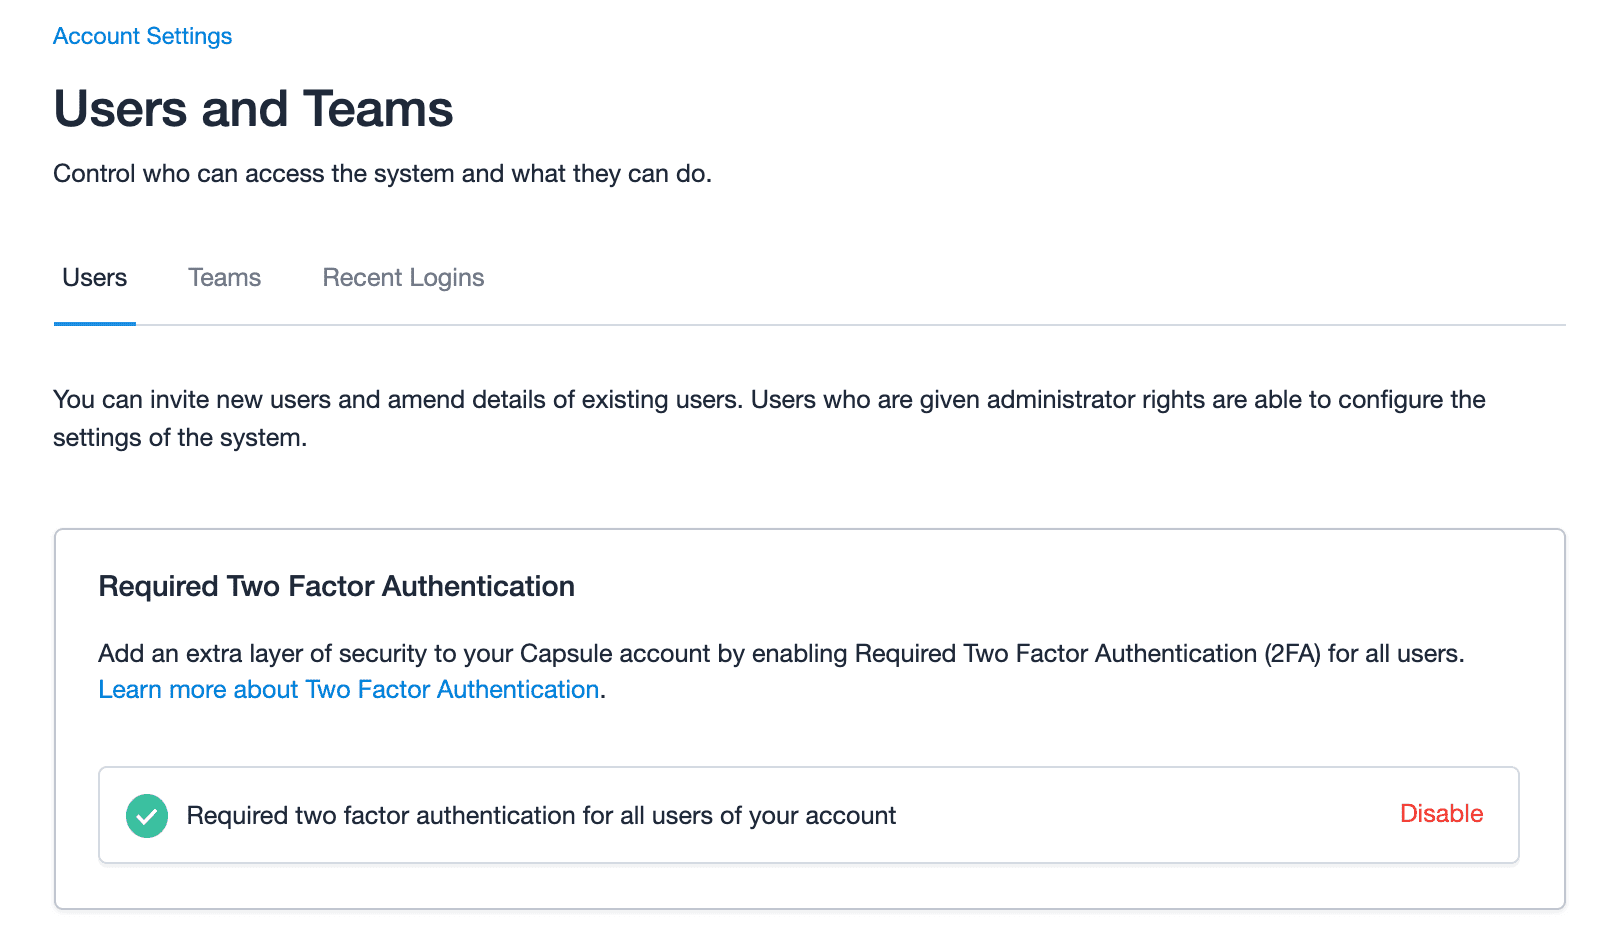 Users and Teams account settings page displaying the option to disable Required Two Factor authentication